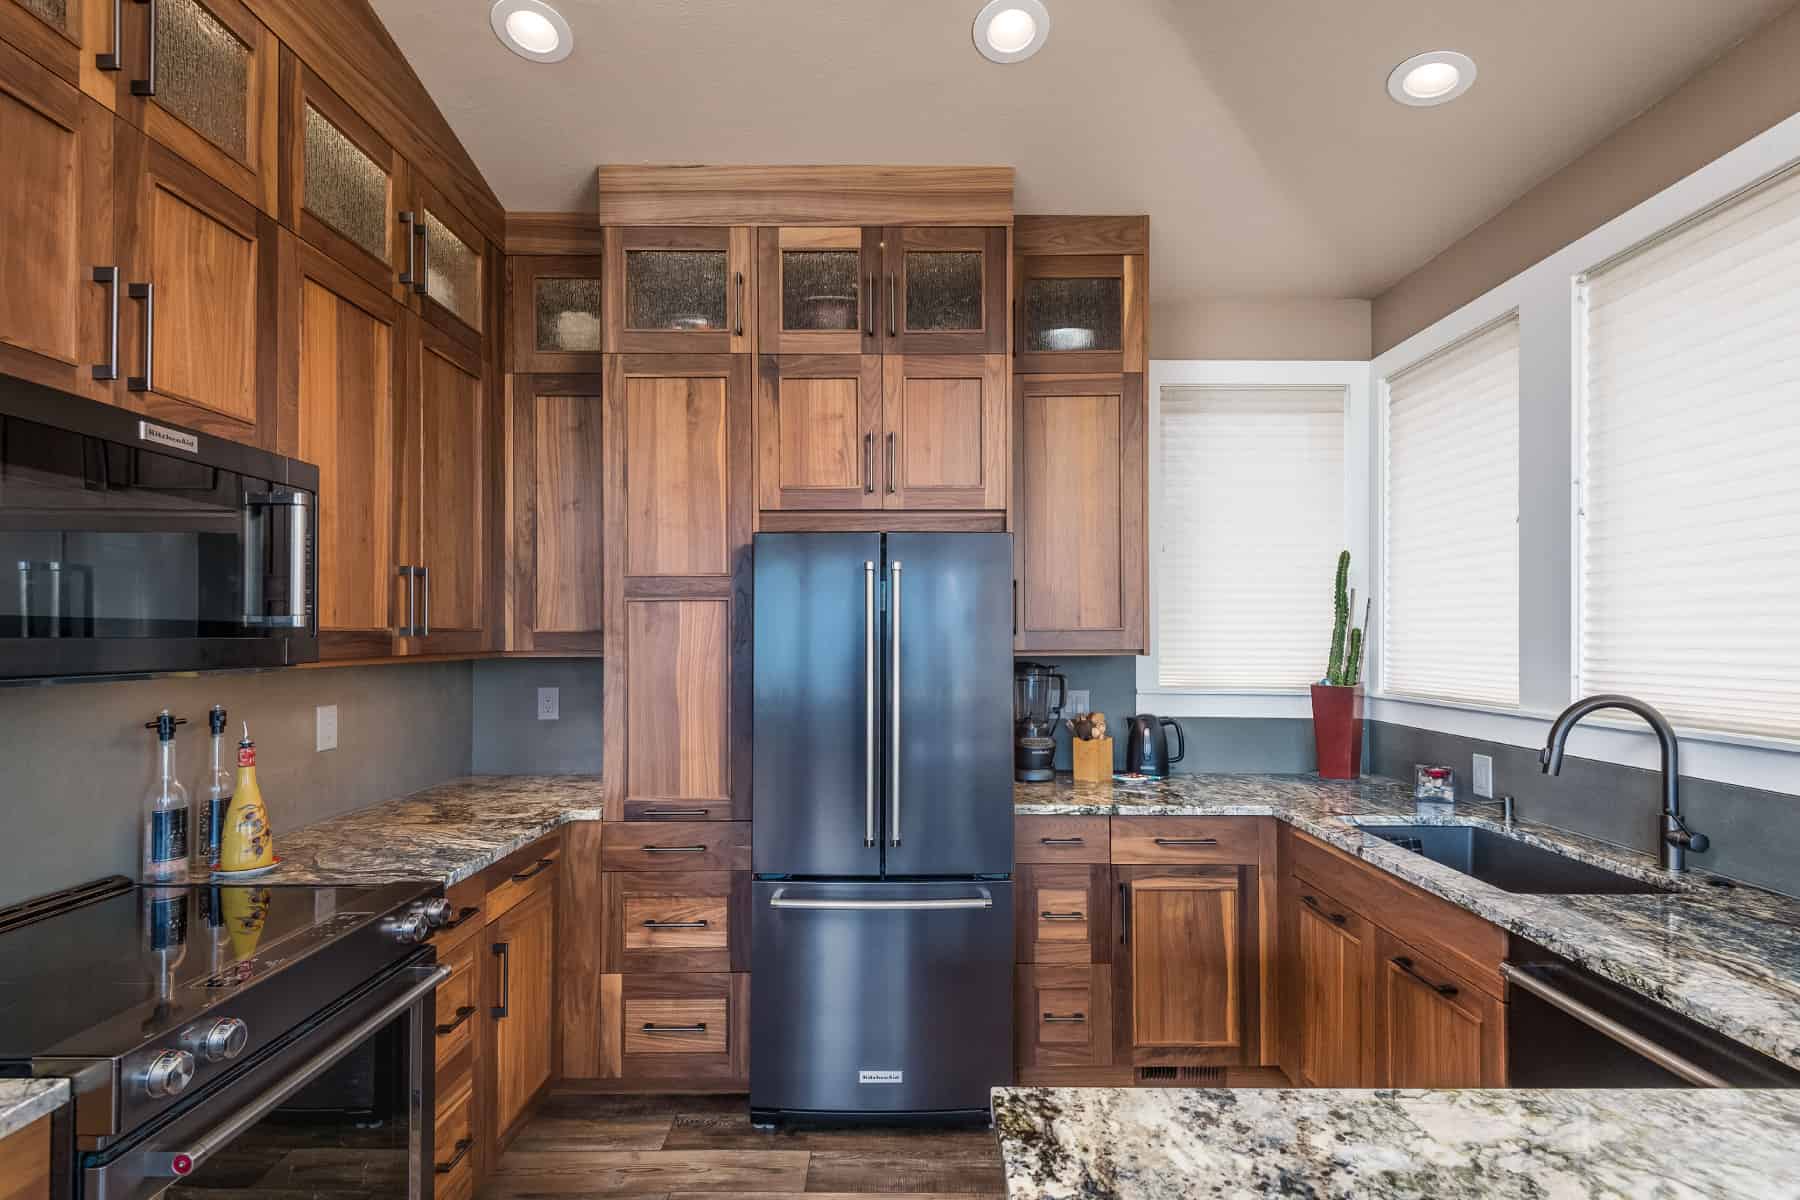 Kitchen with granite countertops, walnut cabinets with a unique modern door style, refrigerator, and electric stovetop.